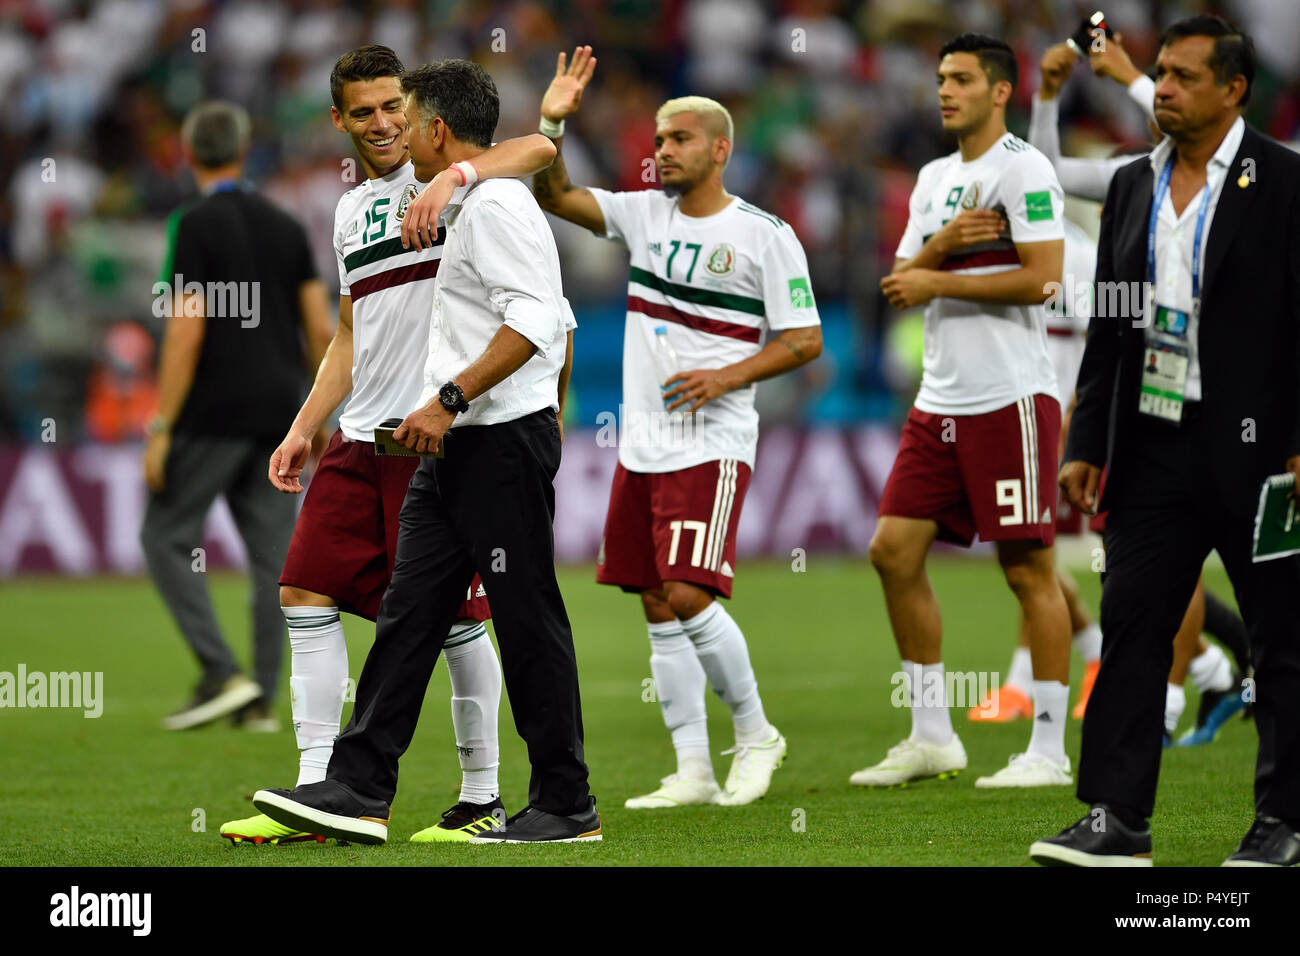 Rostov-on-Don, Russia. 23rd June, 2018. Soccer, FIFA World Cup 2018, South Korea vs Mexico, group stages, Group F, 2nd matchday at the Rostov-on-Don Stadium: Hector Moreno of Mexico (L) and head coach Juan Carlos Osorio after the match. Credit: Marius Becker/dpa/Alamy Live News Stock Photo